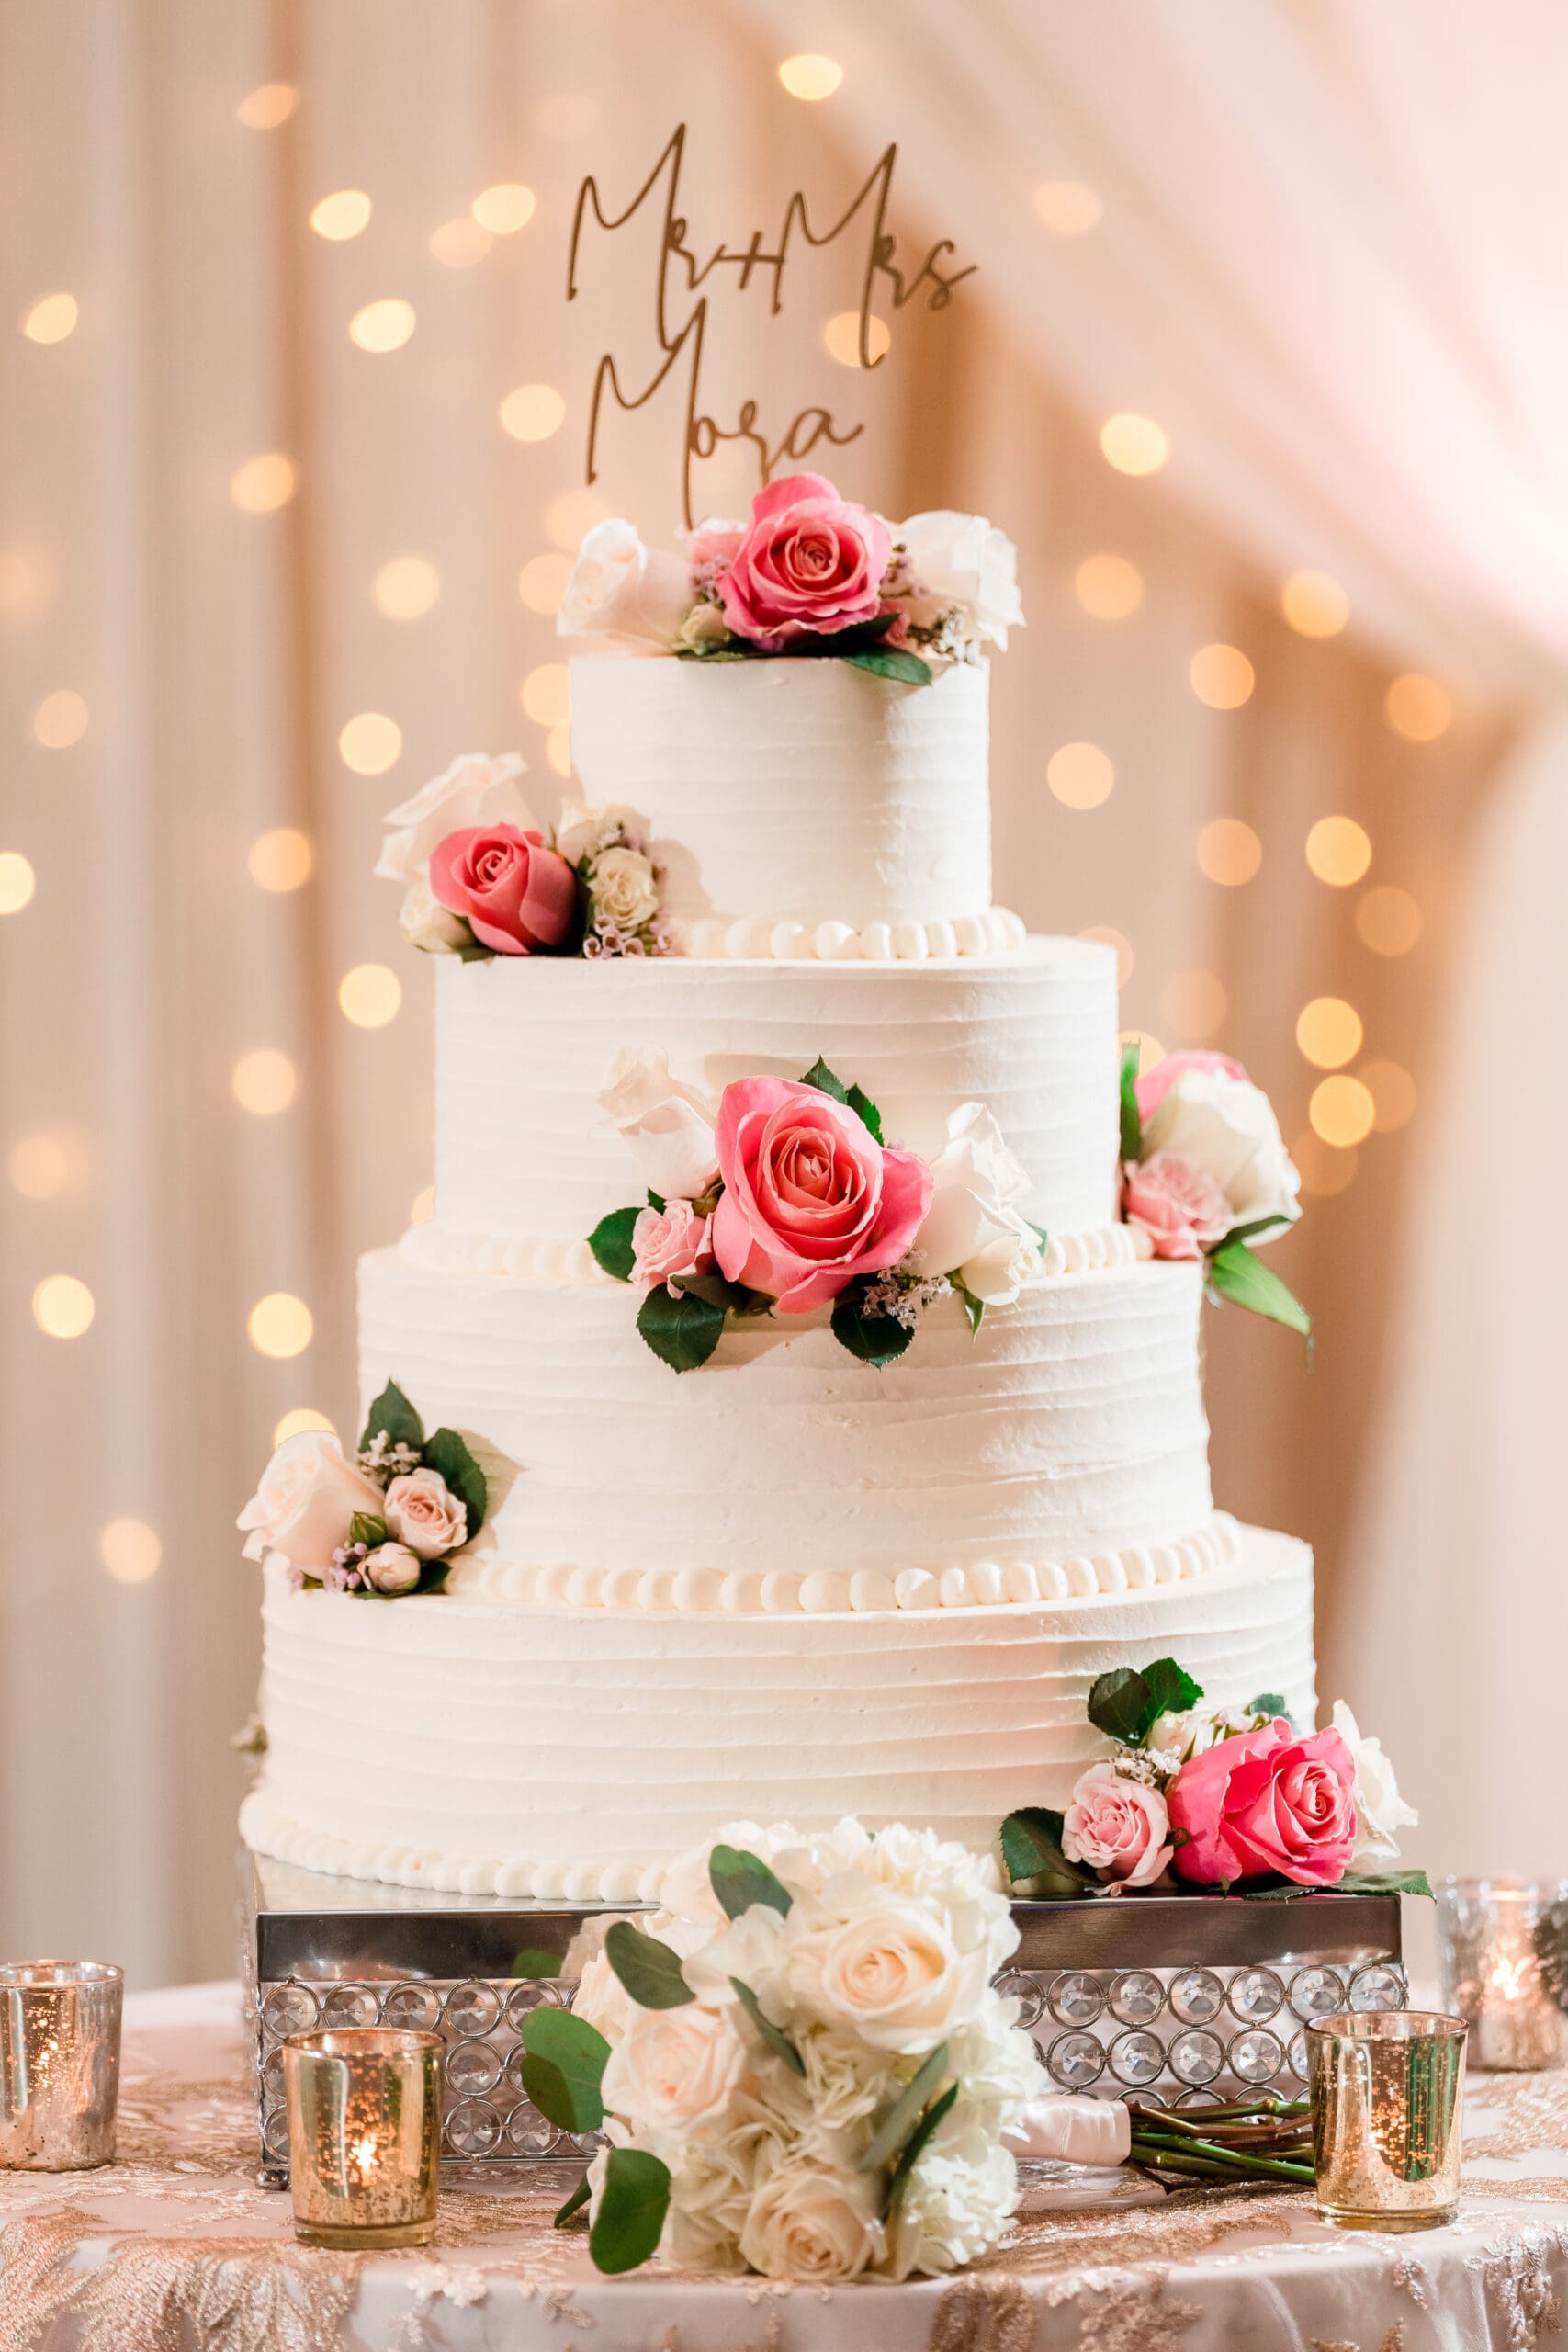 Four-tier wedding cake adorned with red and white edible flowers